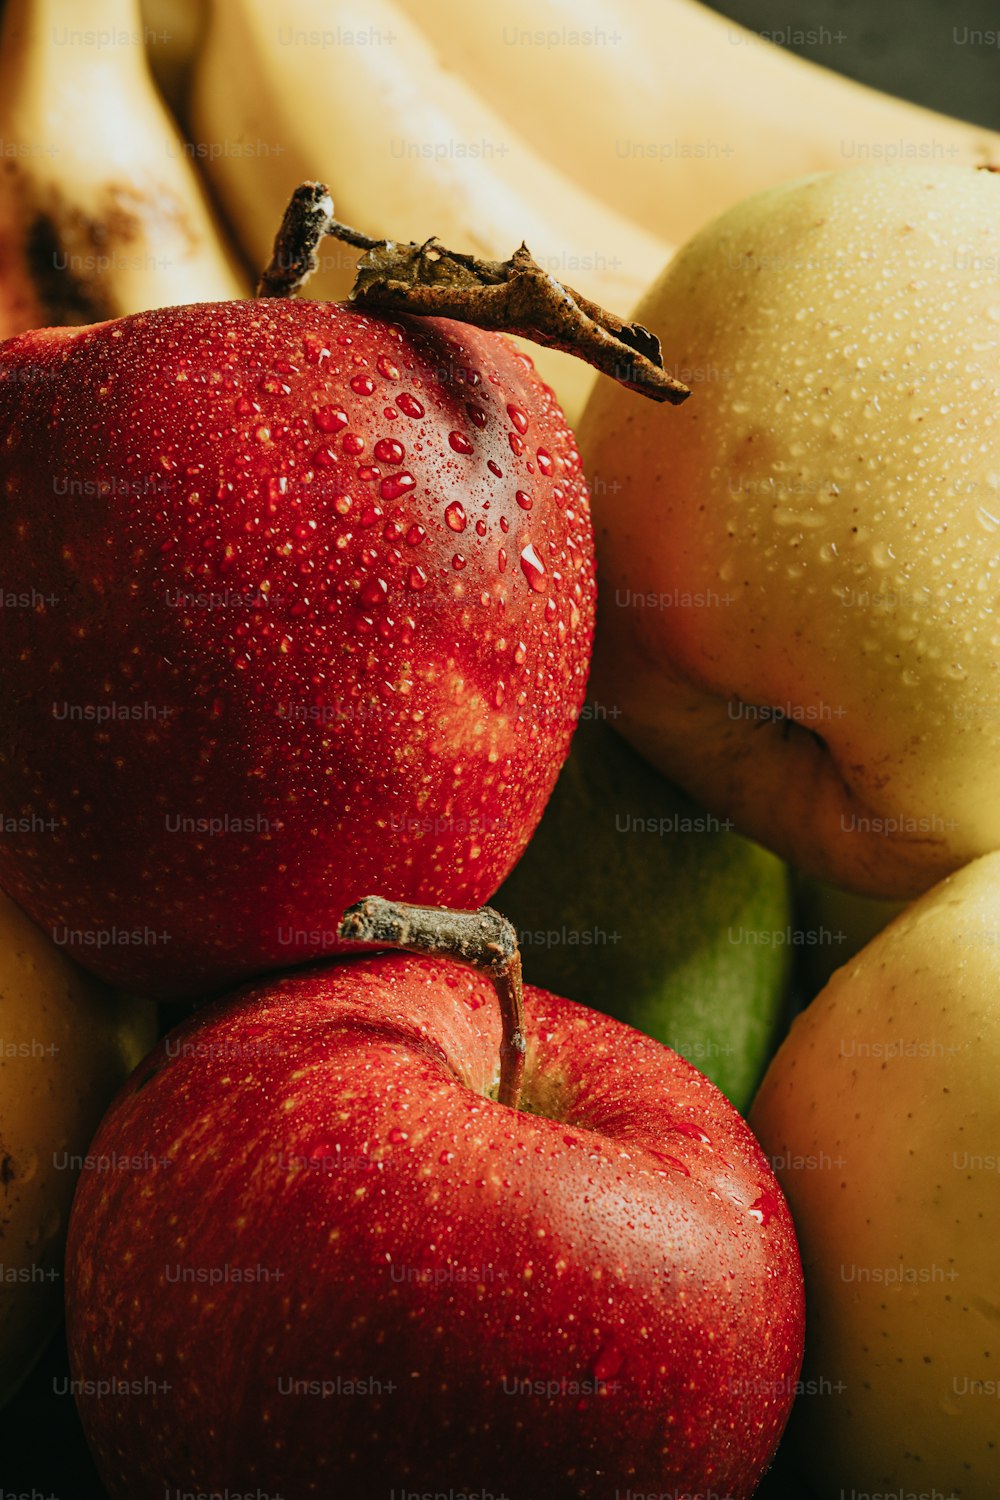 a close up of apples and bananas on a table